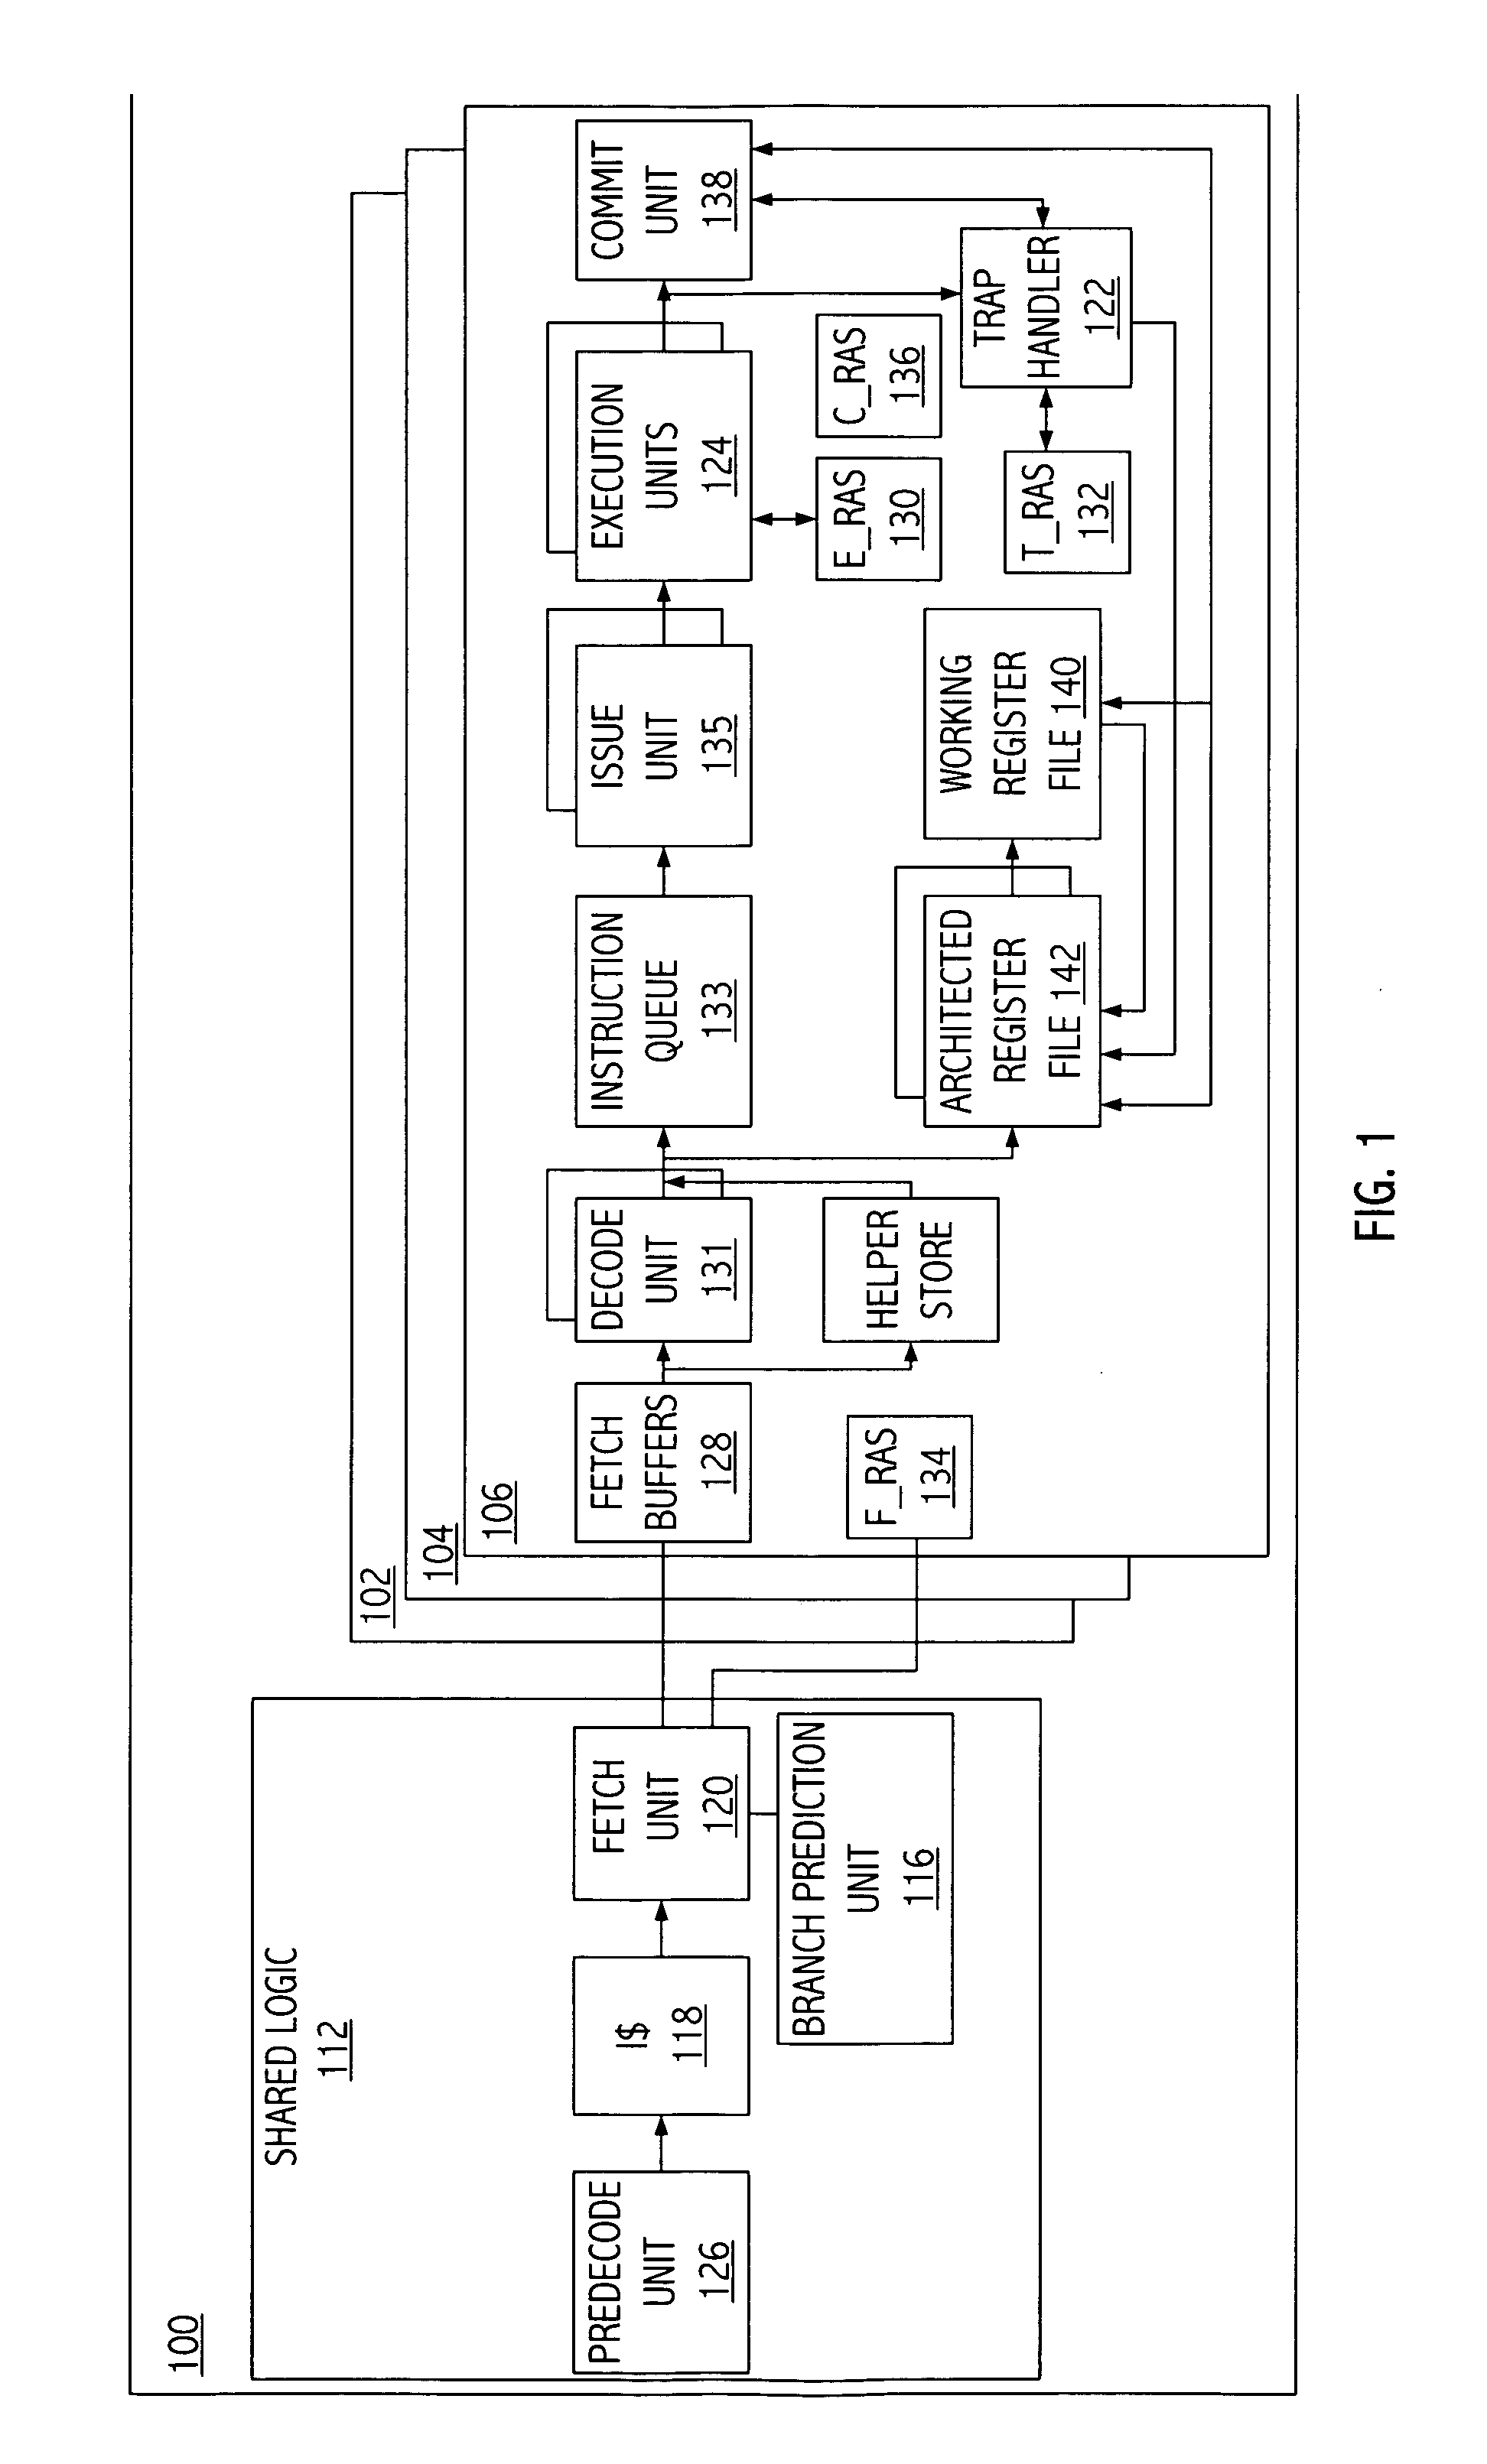 Return address stack recovery in a speculative execution computing apparatus